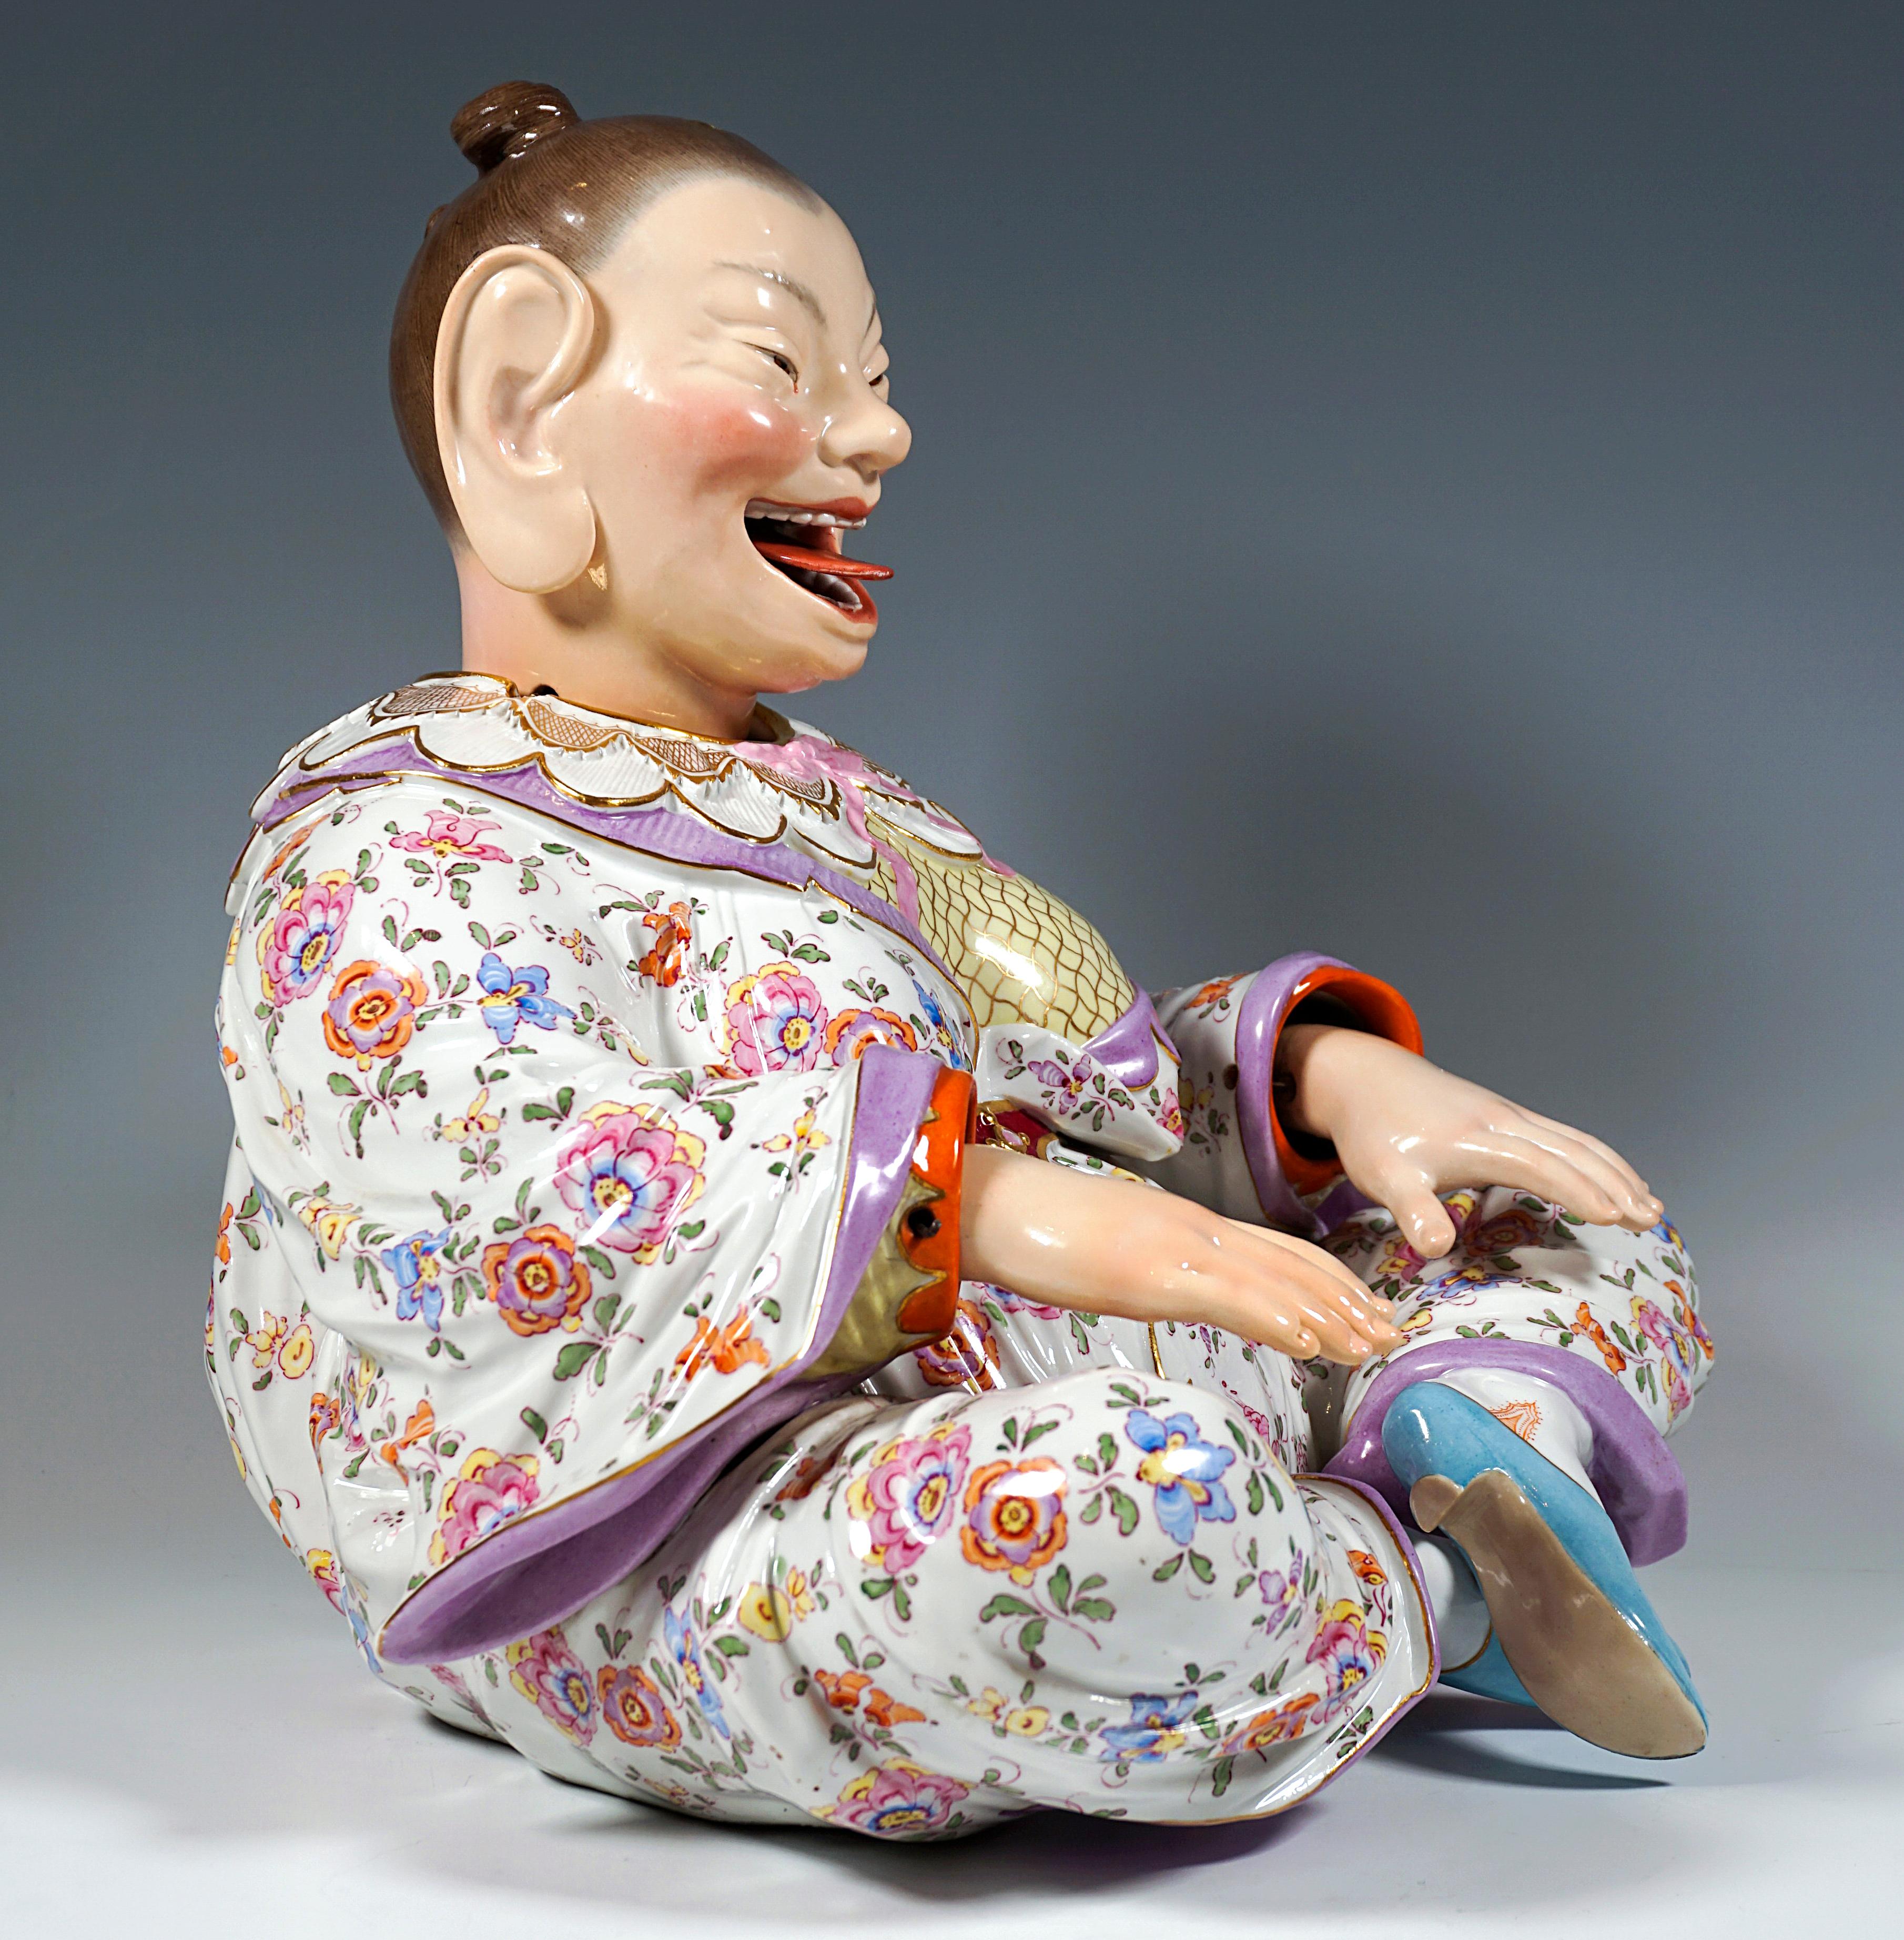 Depiction of a seated, smiling female Buddha figure from a series of folk figures. Voluminous female body with her hair tied back tightly and a tight-fitting robe with wide sleeves, sitting cross-legged and holding her arms straight out in front of